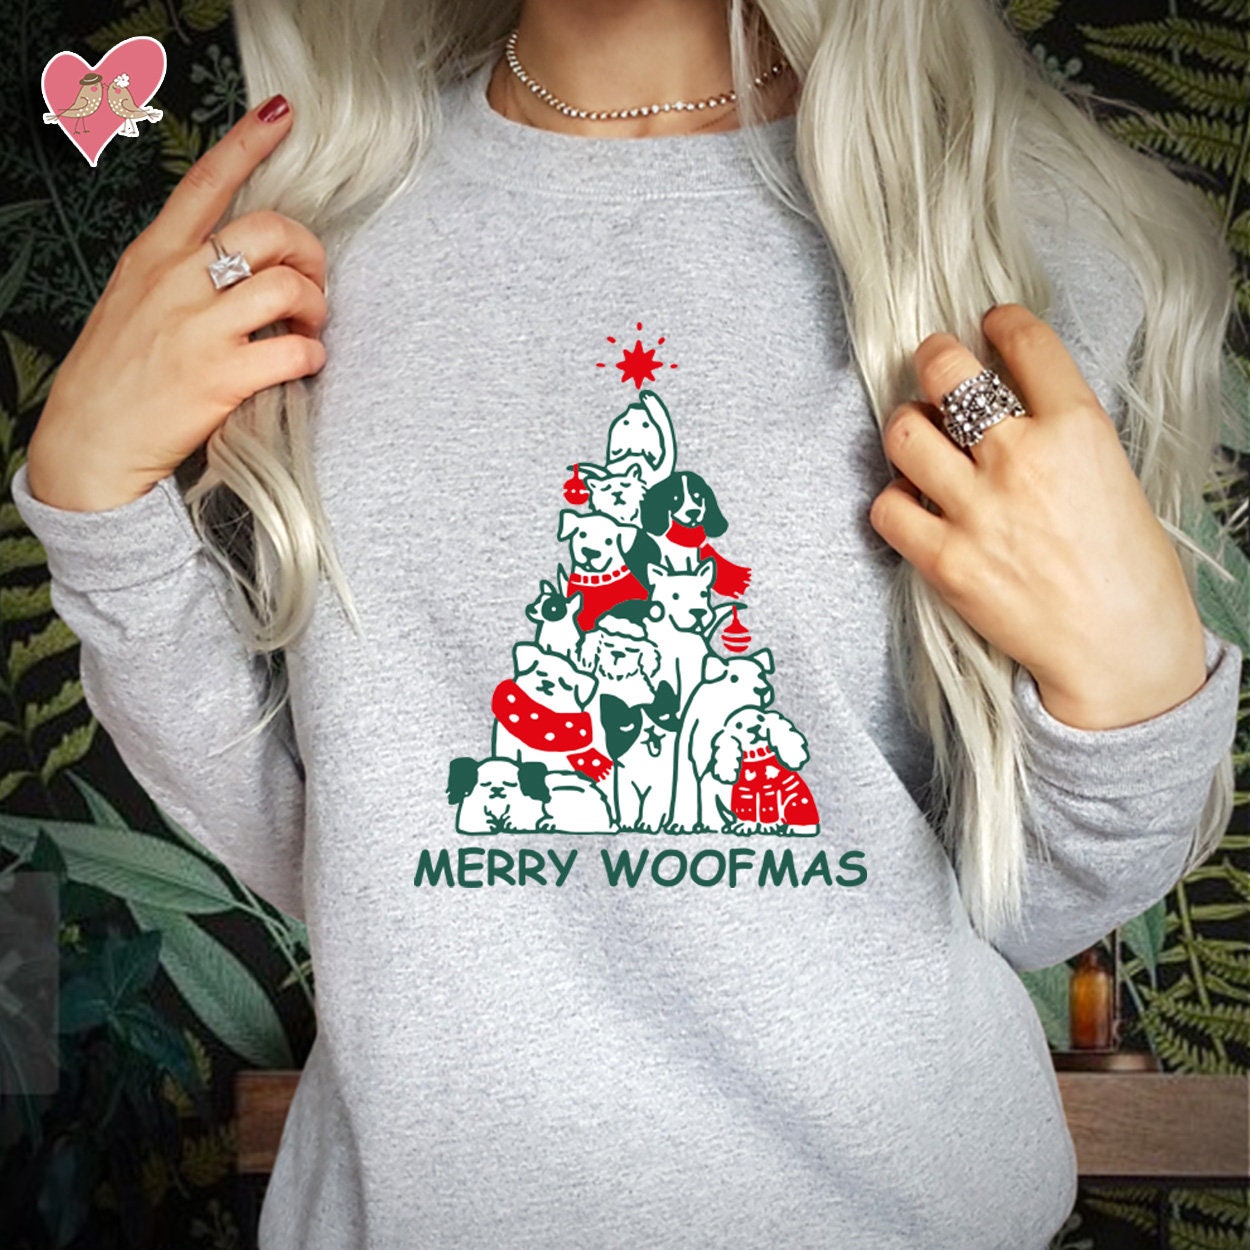 Discover SWEATSHIRT (5066) MERRY WOOFMAS Jumper Dogs Xmas Tree Funny  Gift For Dog Lovers Men Women Kids Family Holiday Christmas Sweatshirts